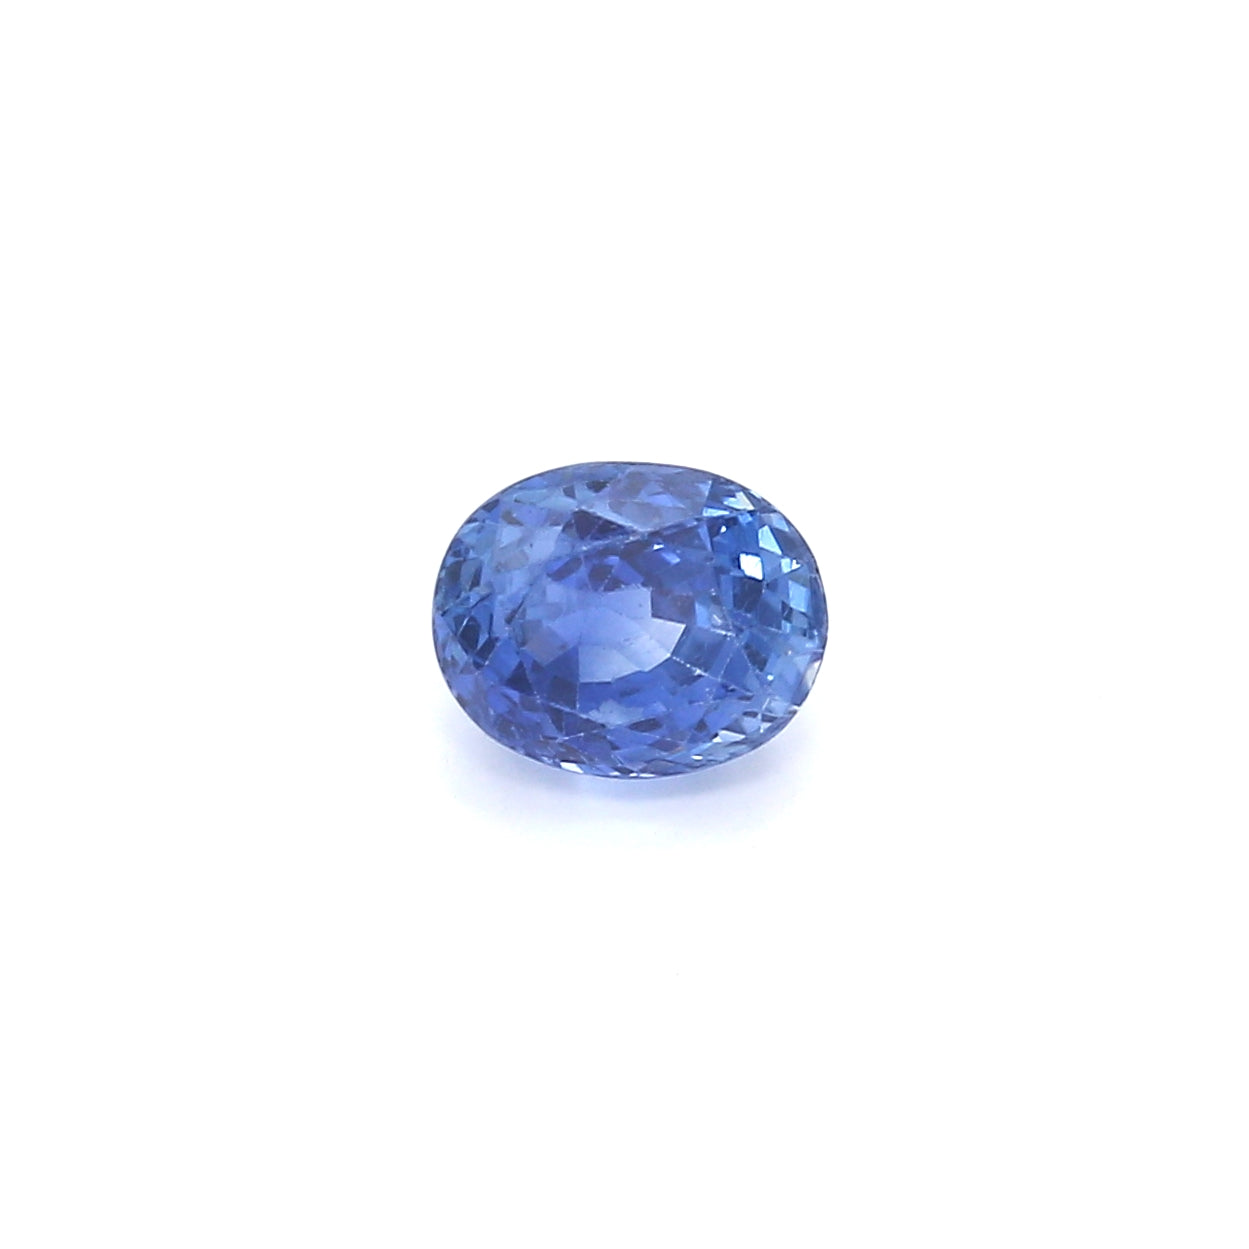 1.66ct Oval Sapphire, Heated, Unknown - 7.00 x 5.63 x 4.86mm